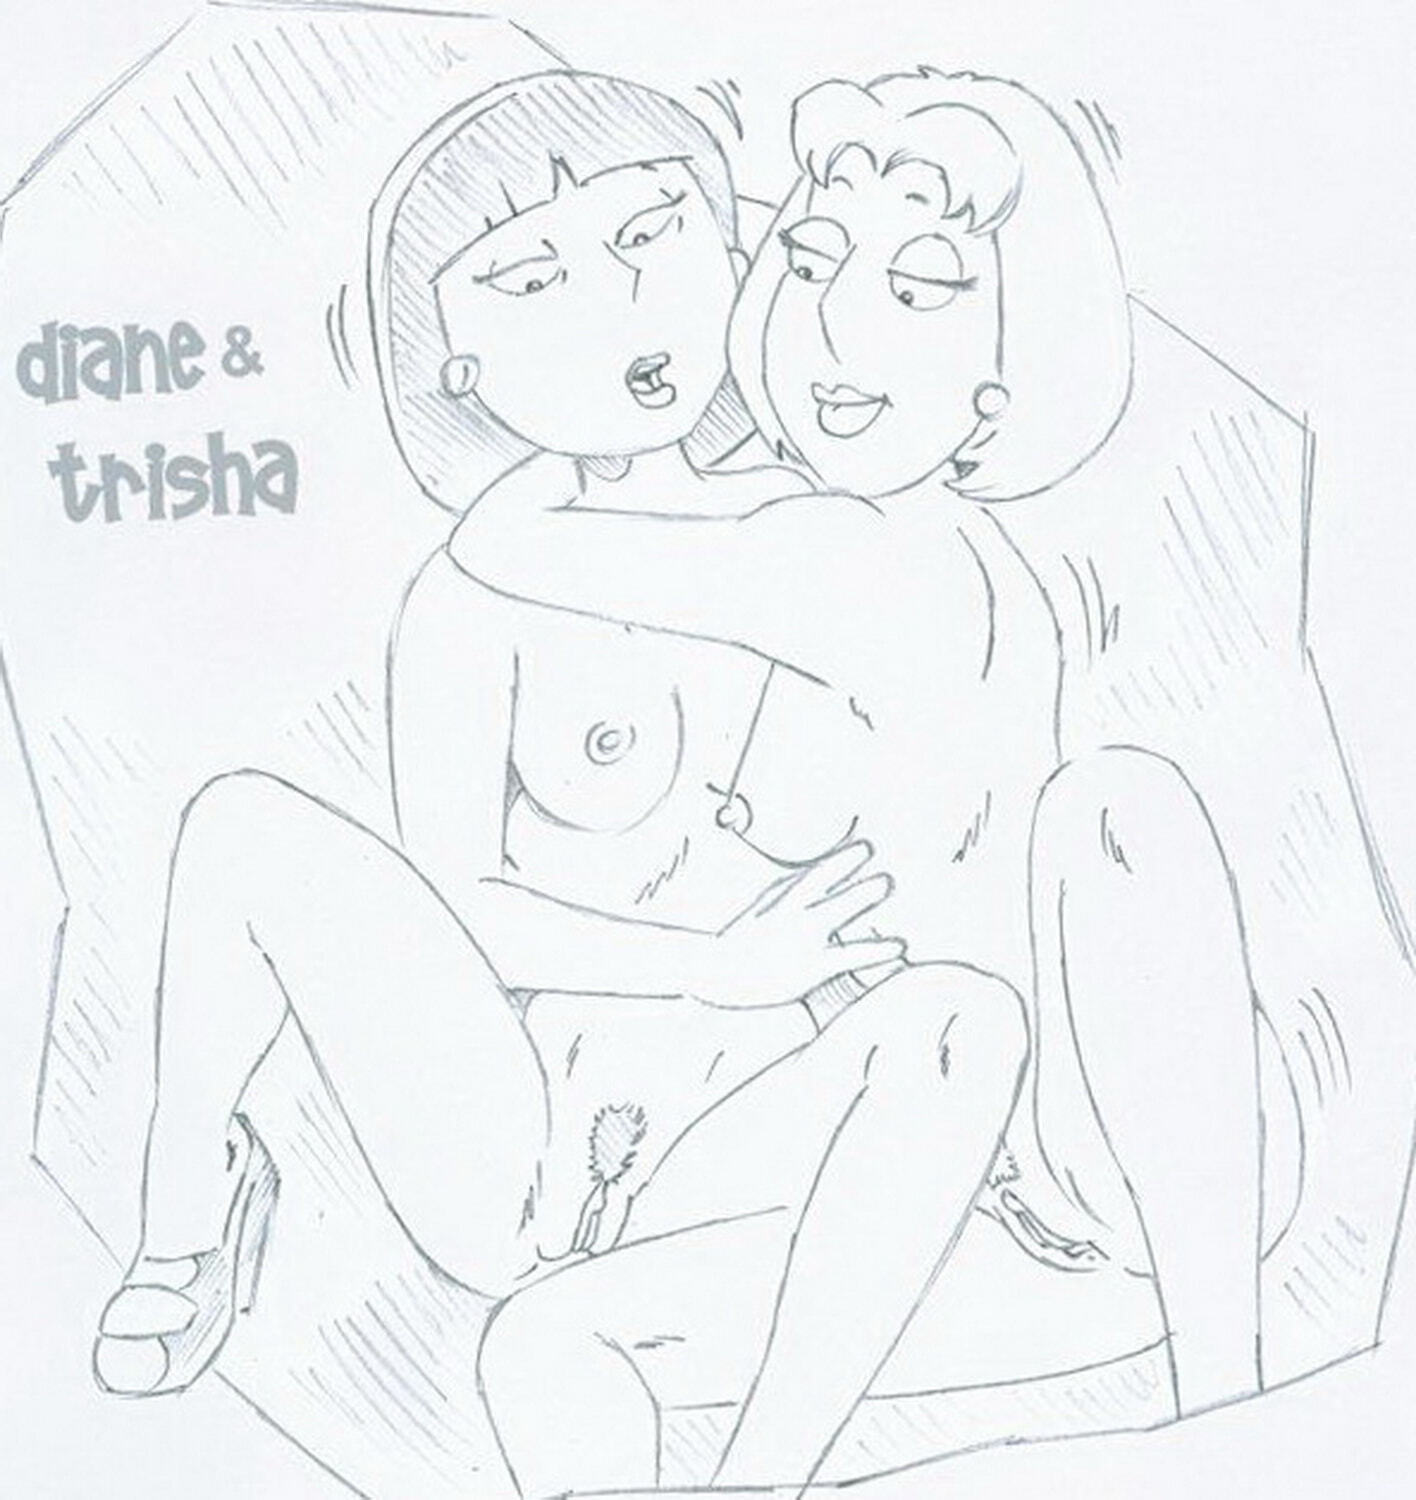 Hot Diane Simmons and Tricia Takanawa in Your Cartoon gallery. 